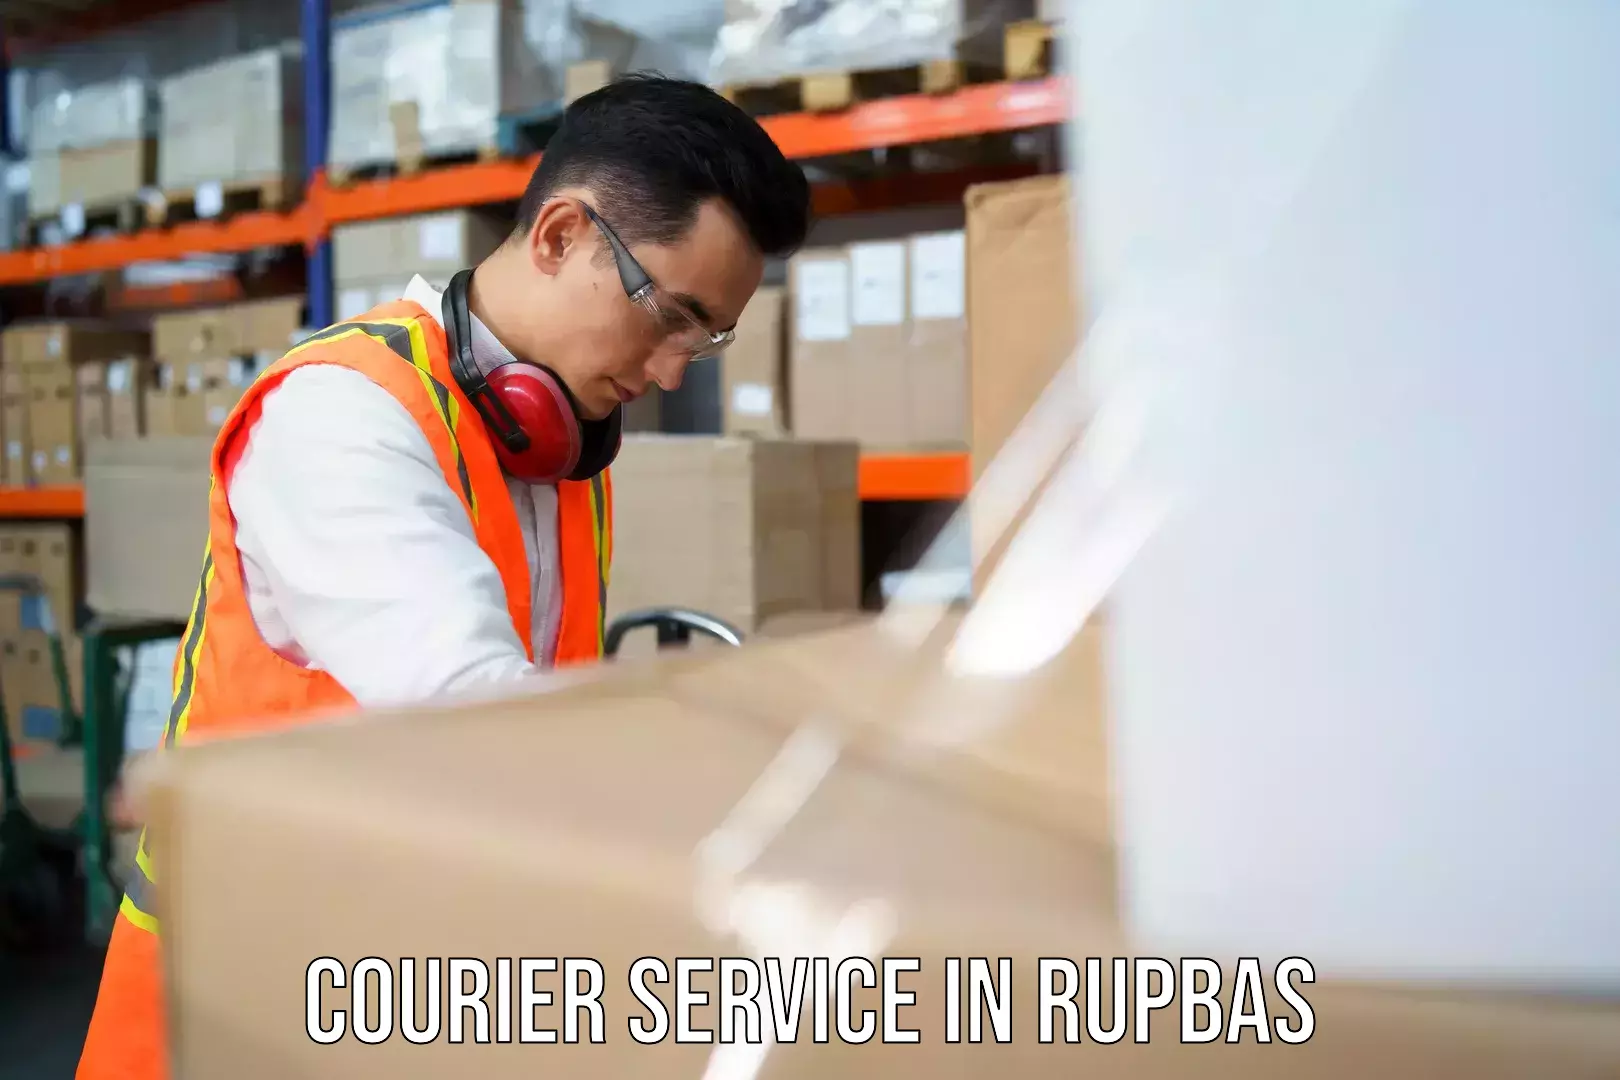 Budget-friendly shipping in Rupbas